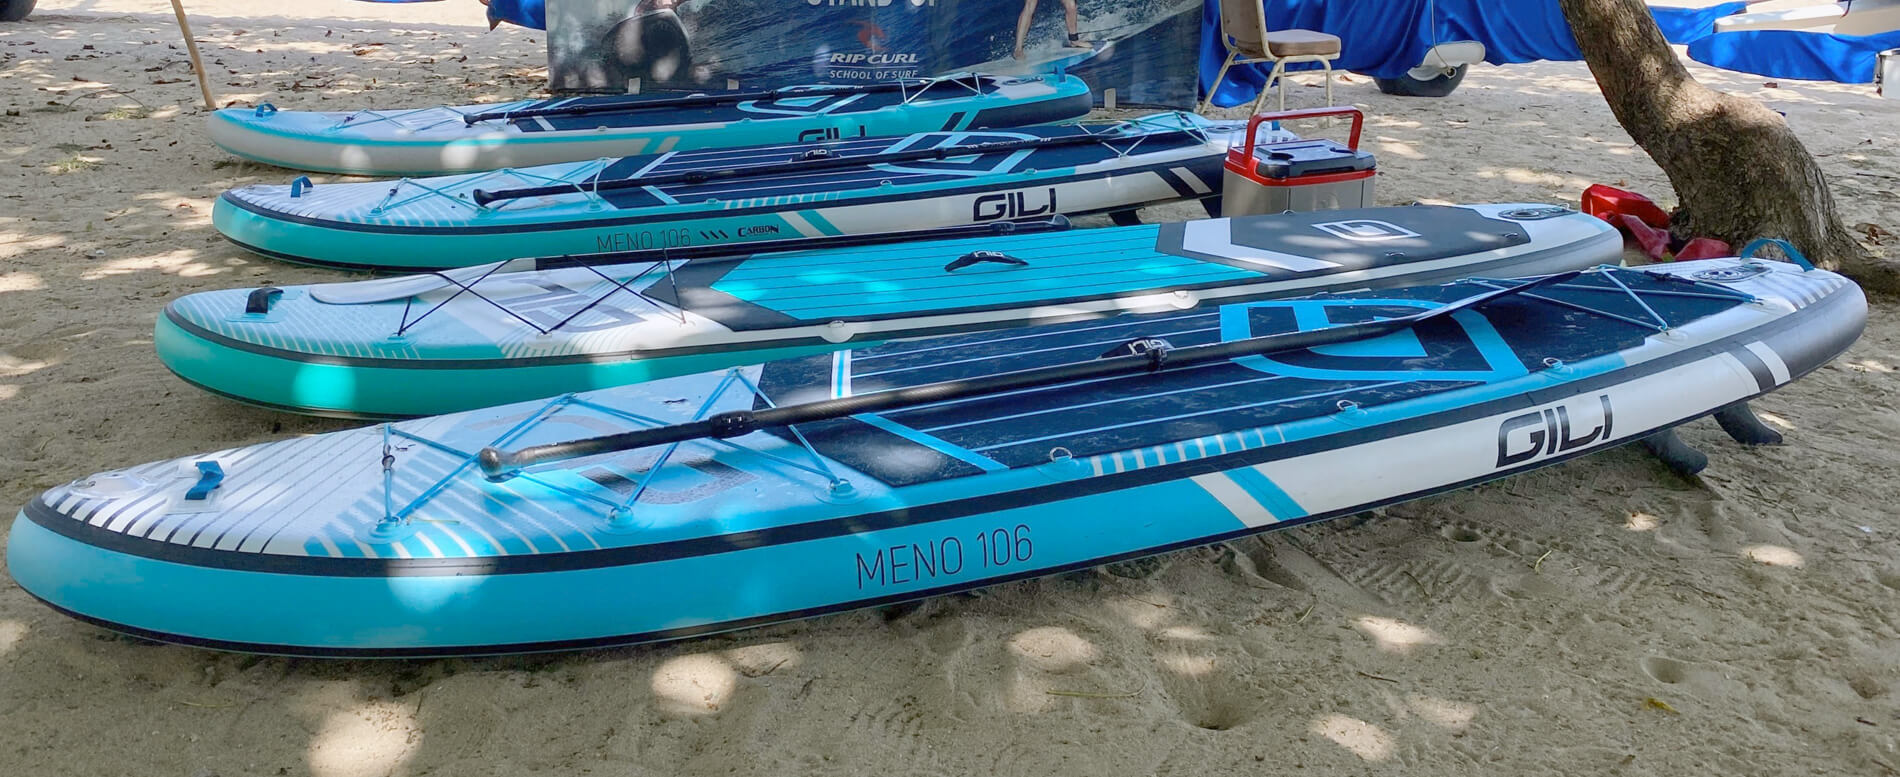 Three inflatable paddle boards